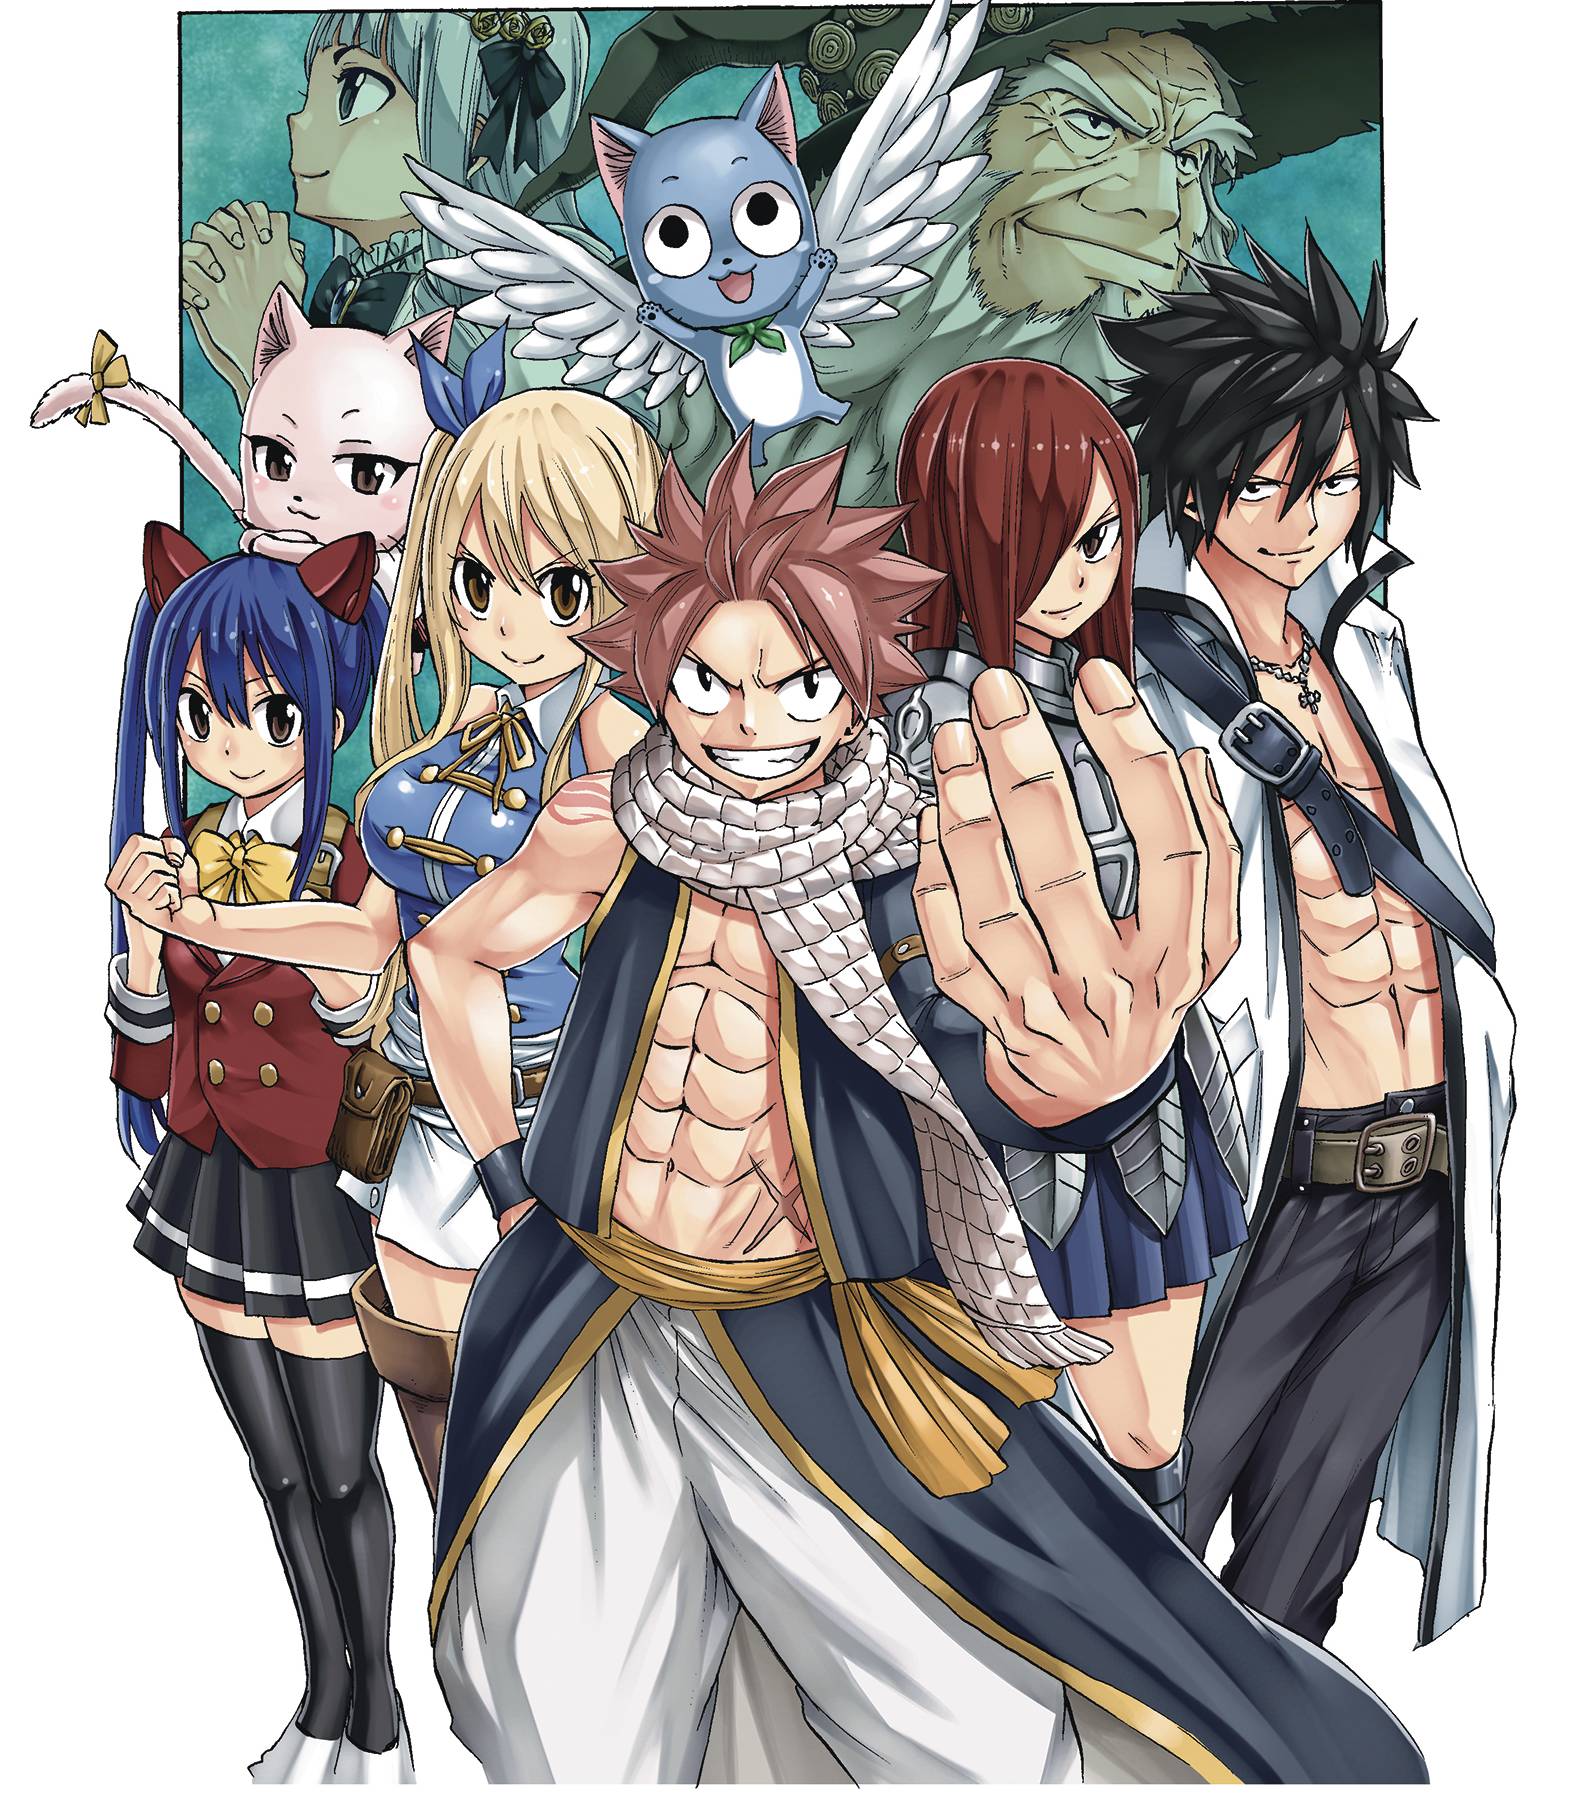 Fairy Tail 100 Years Quest Gn Vol 09 (C: 0-1-1) (12/15/2021) - State of Comics